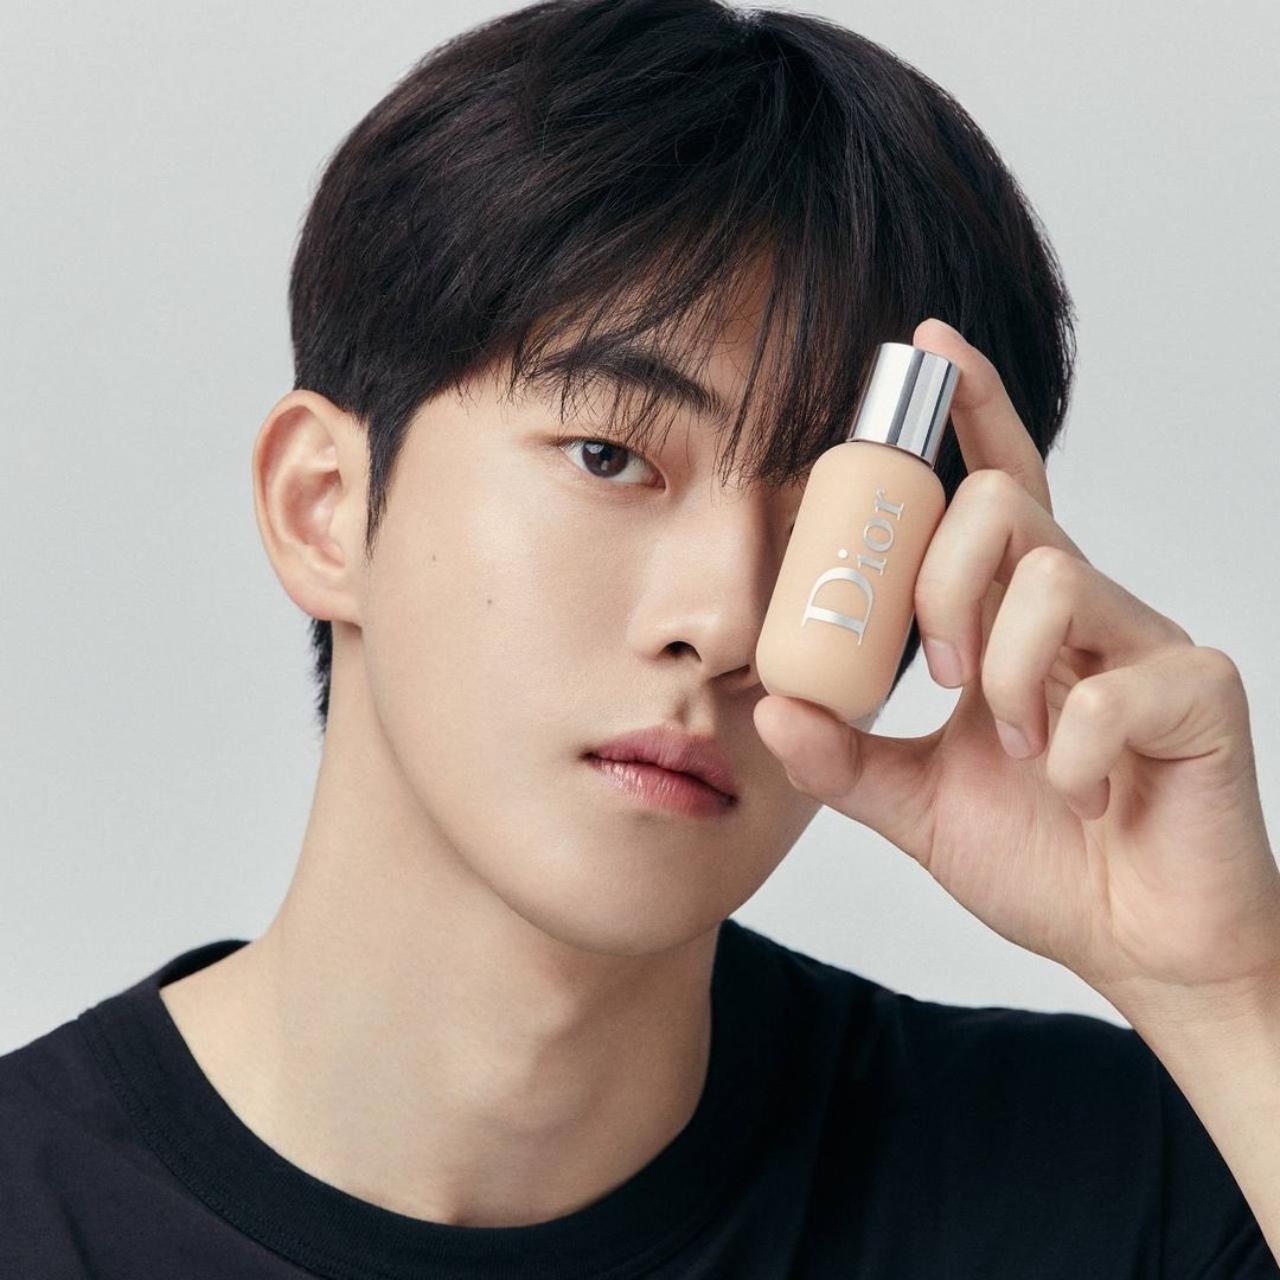 Nam Joo Hyuk for Dior
Joo Hyuk who quickly became a global heartthrobe owing to his role in popular K-drama 'Startup' did multiple stints with Dior. He was first appointed as an ambassador for the Dior Men's collection and started representing Dior Beauty Korea from 2021